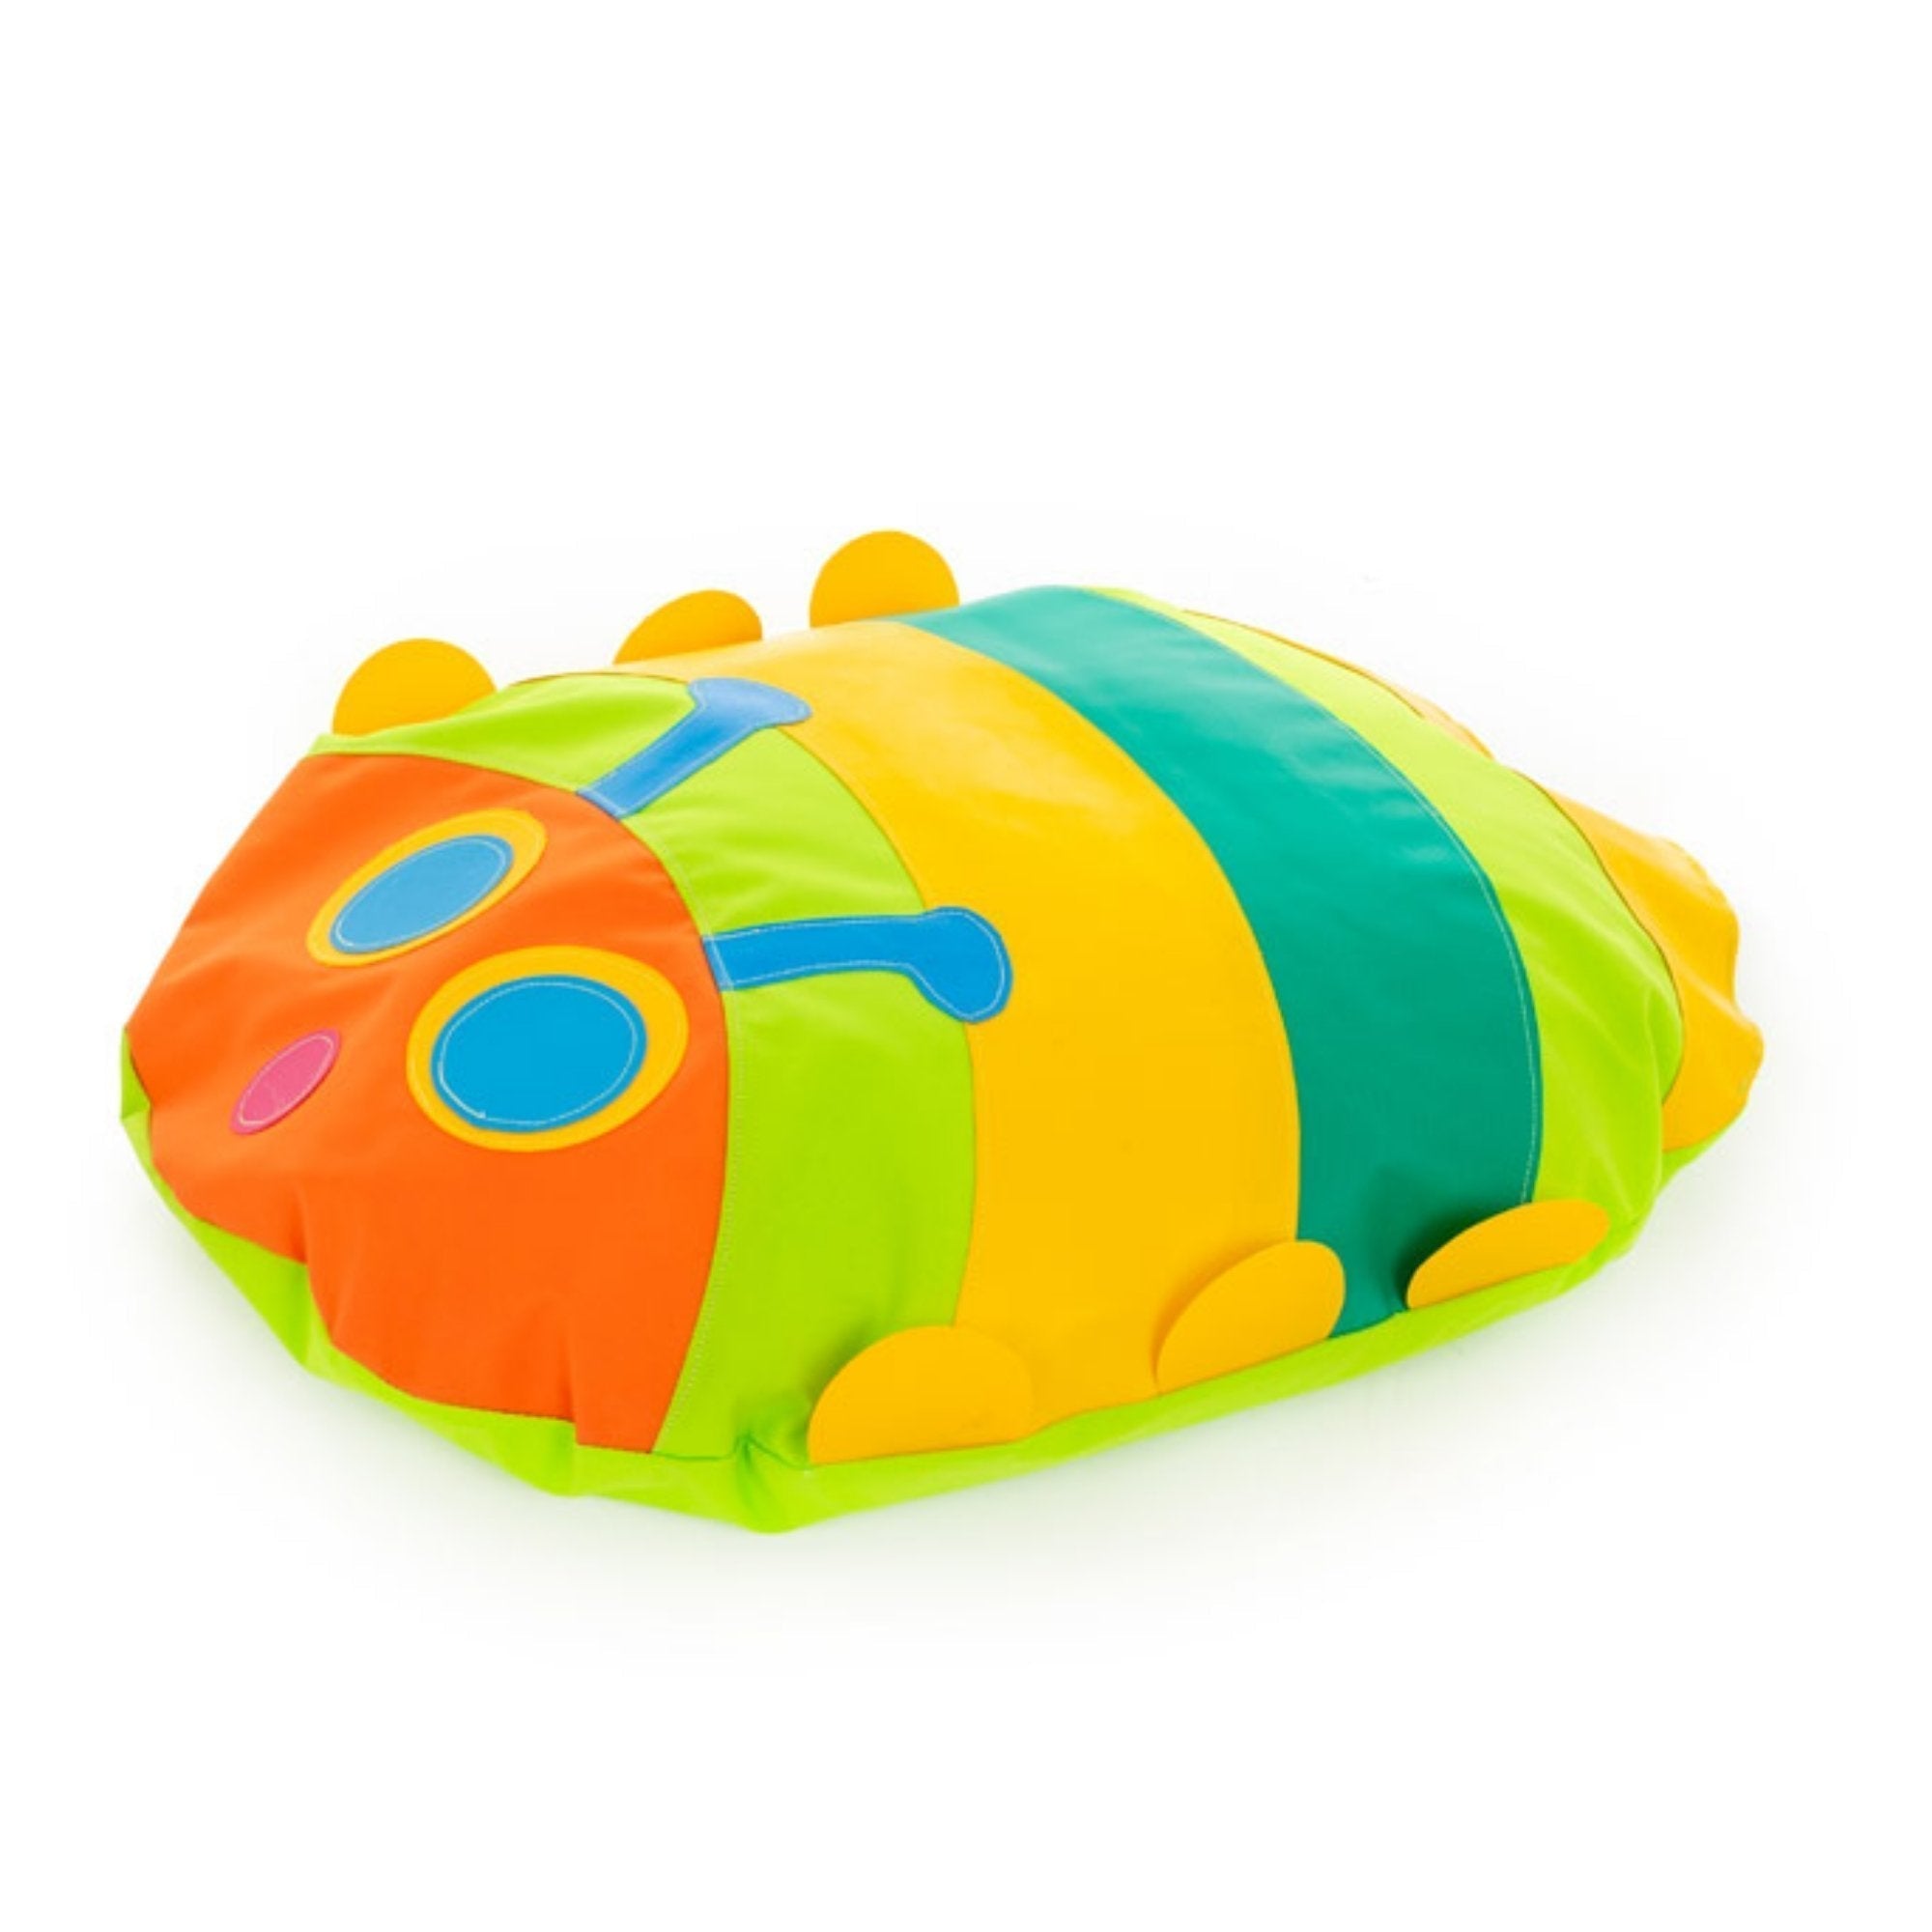 Cosy Friends Caterpillar Cushion, Create the perfect learning atmosphere in the classroom with the Cosy Friends Caterpillar Cushion The Cosy Friends Caterpillar Cushion is a colourful stylish addition to any classroom setting with vibrant colours that will create a delightful focal point. Children will love the vibrant colours these Cosy Friends Caterpillar Cushion add to your room. These Fun Creature Bean Bags are designed for seating all around the nursery. The loveable designs each represent species from